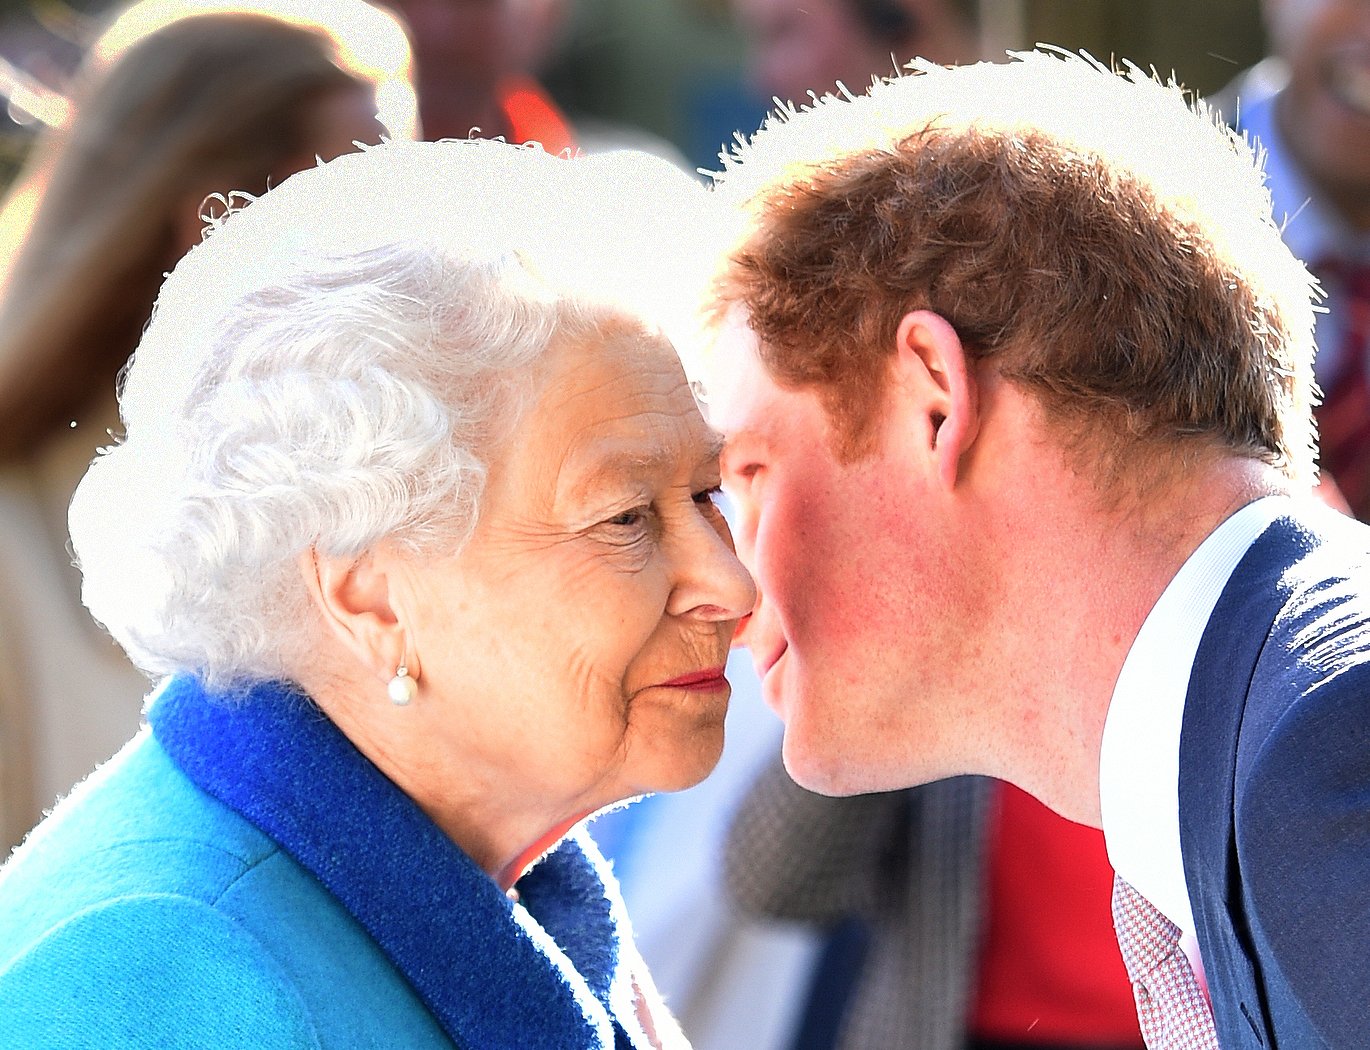 Queen Elizabeth II and Prince Harry at the annual Chelsea Flower Show on May 18, 2015, in London, England. | Source: Julian Simmonds - WPA Pool/Getty Images